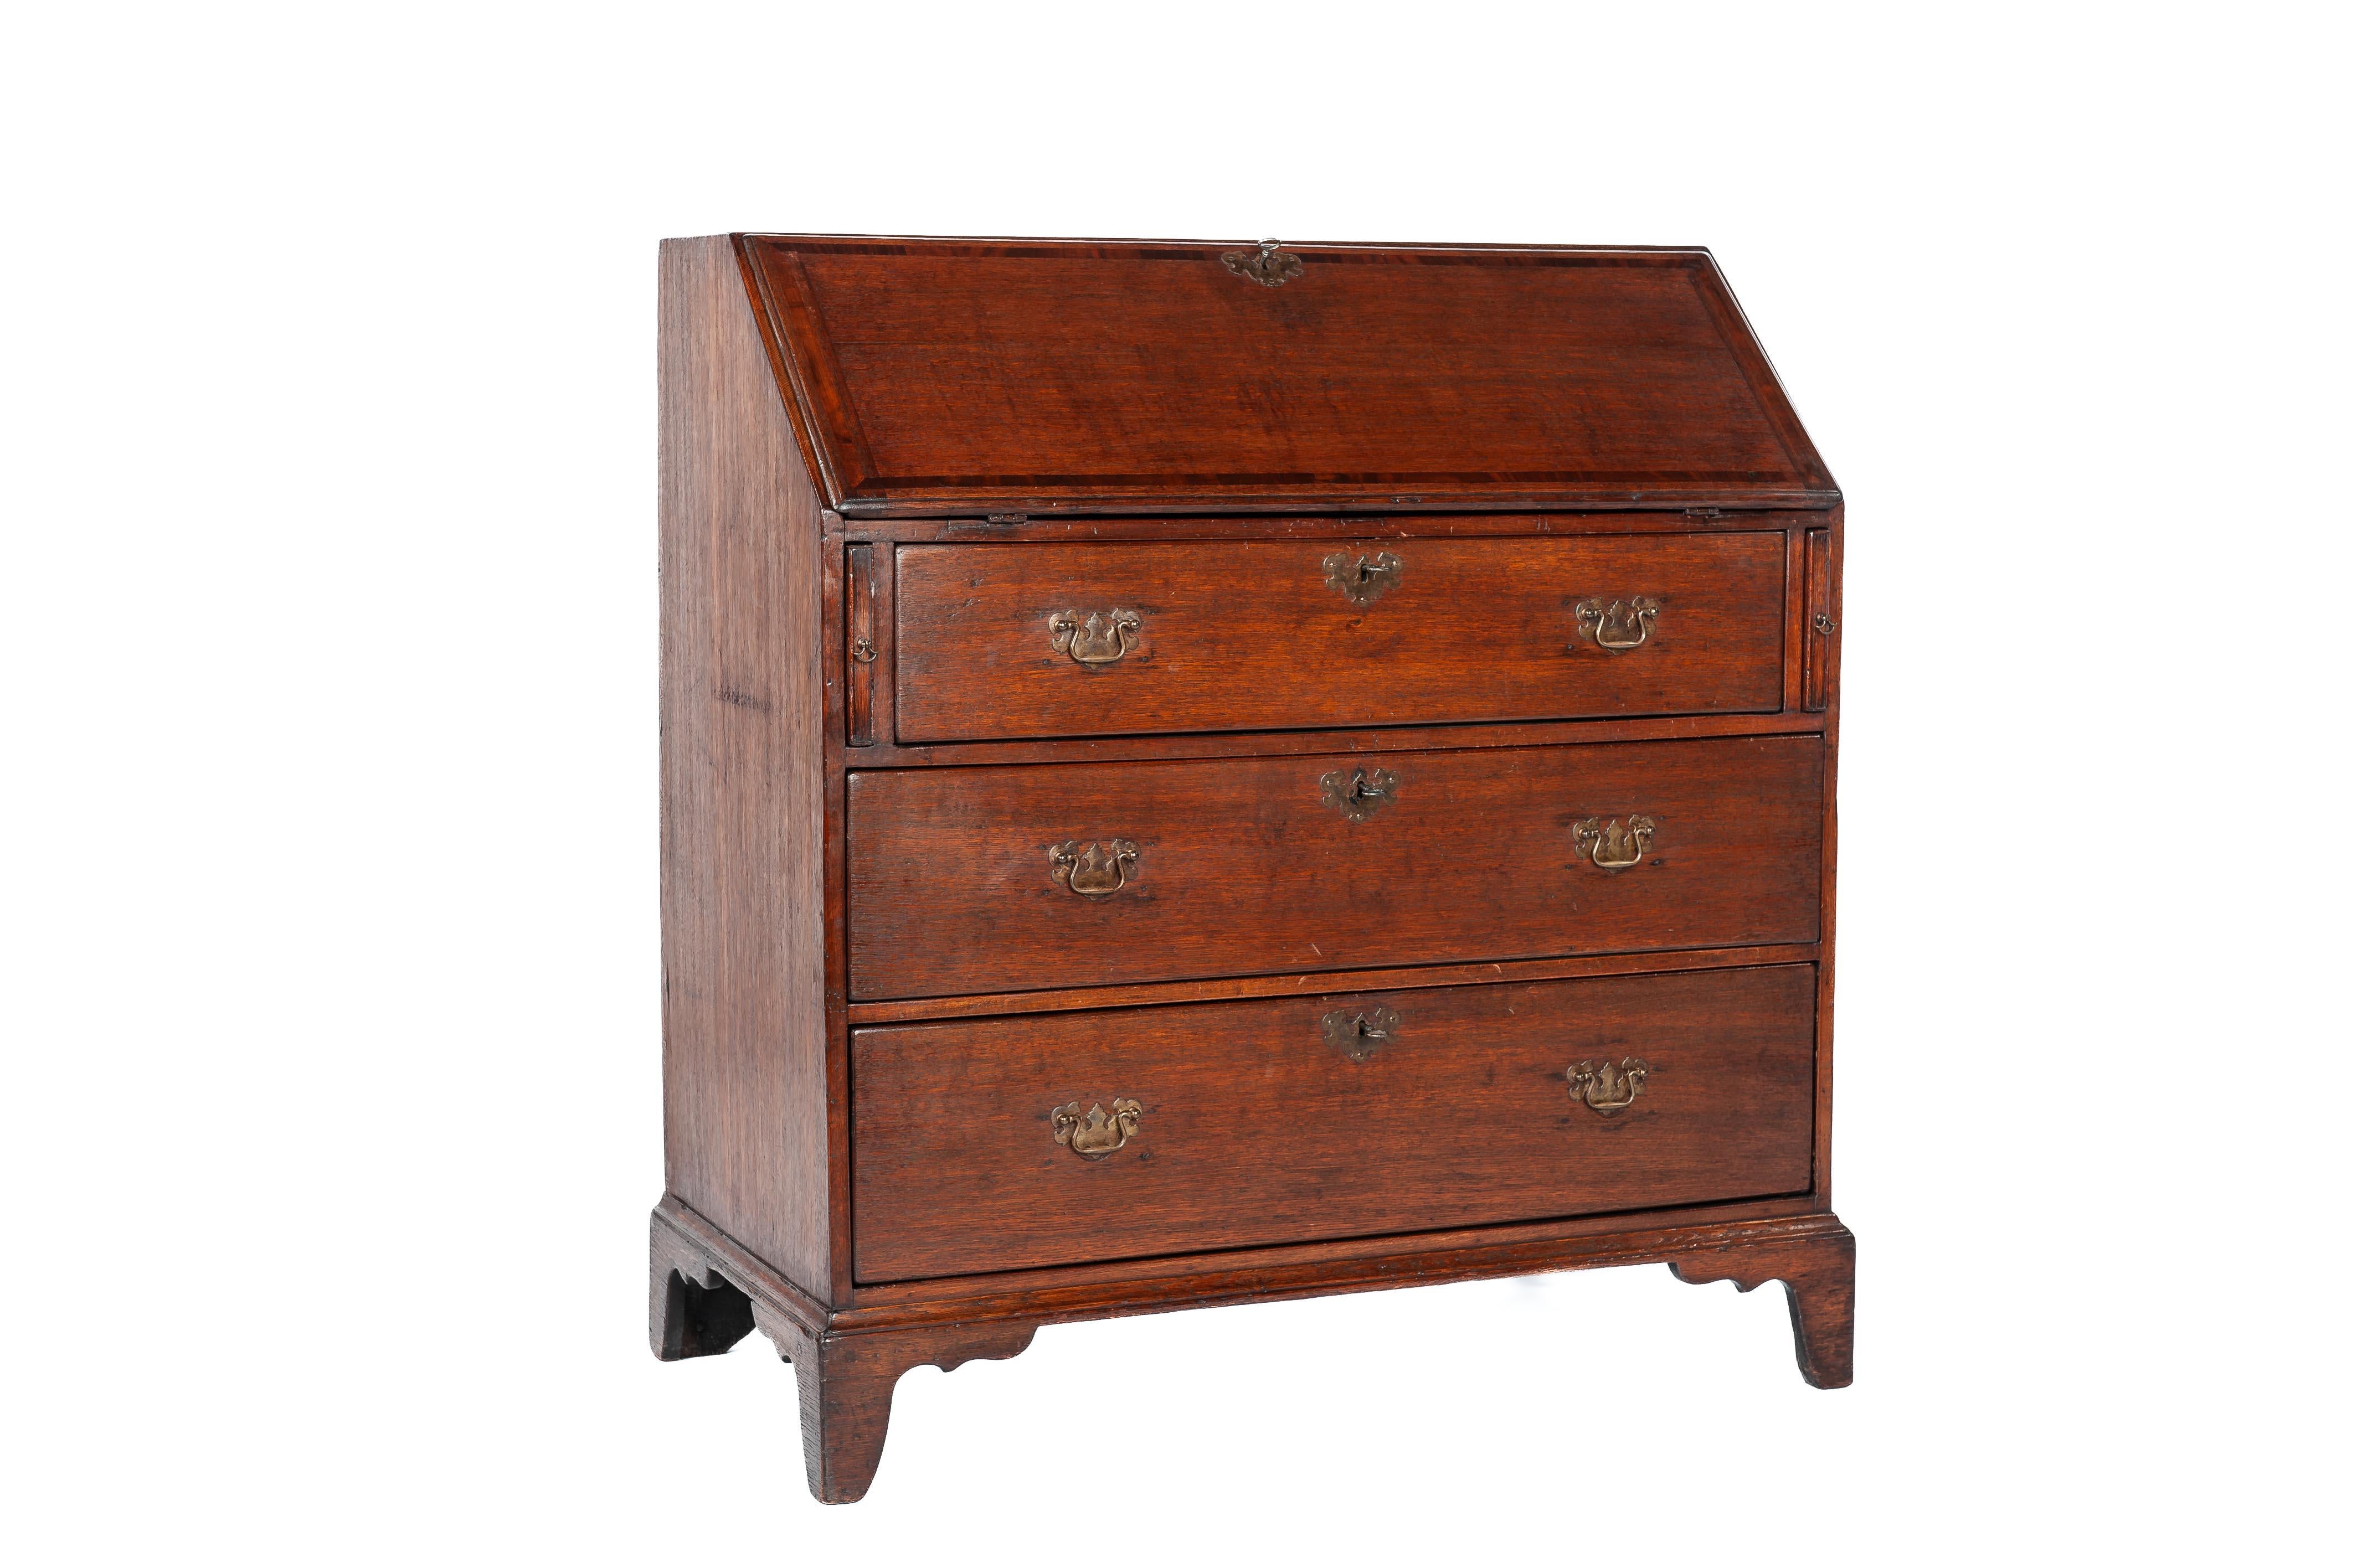 Presented here is a stunning antique slant-front secretary desk crafted in oak wood in England in the late 19th century, circa 1870. The desk features three drawers with a pine interior, adorned with beautifully shaped brass fittings and equipped